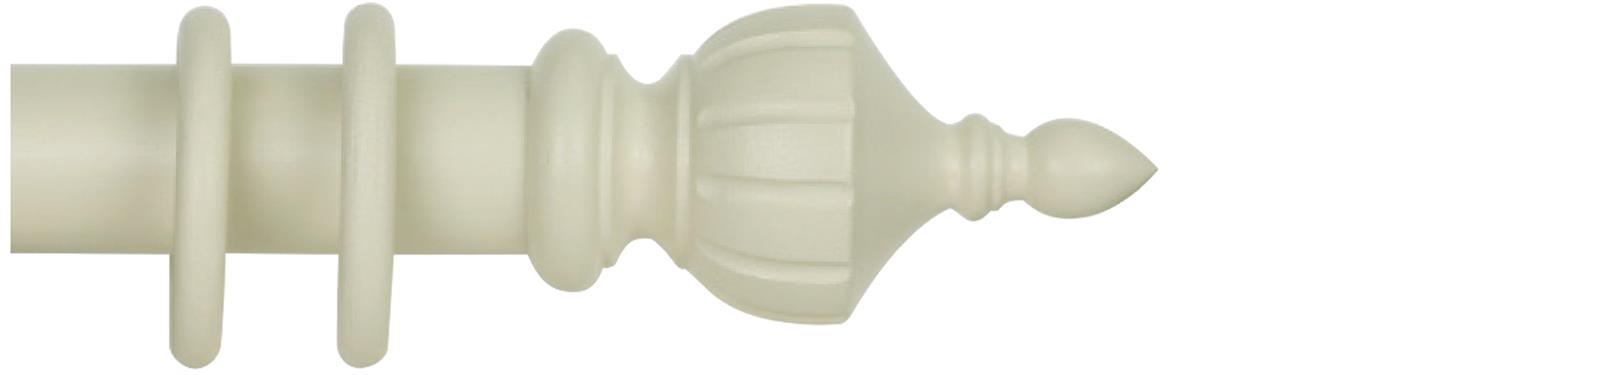 Cameron Fuller 63mm Pole Ivory Crown